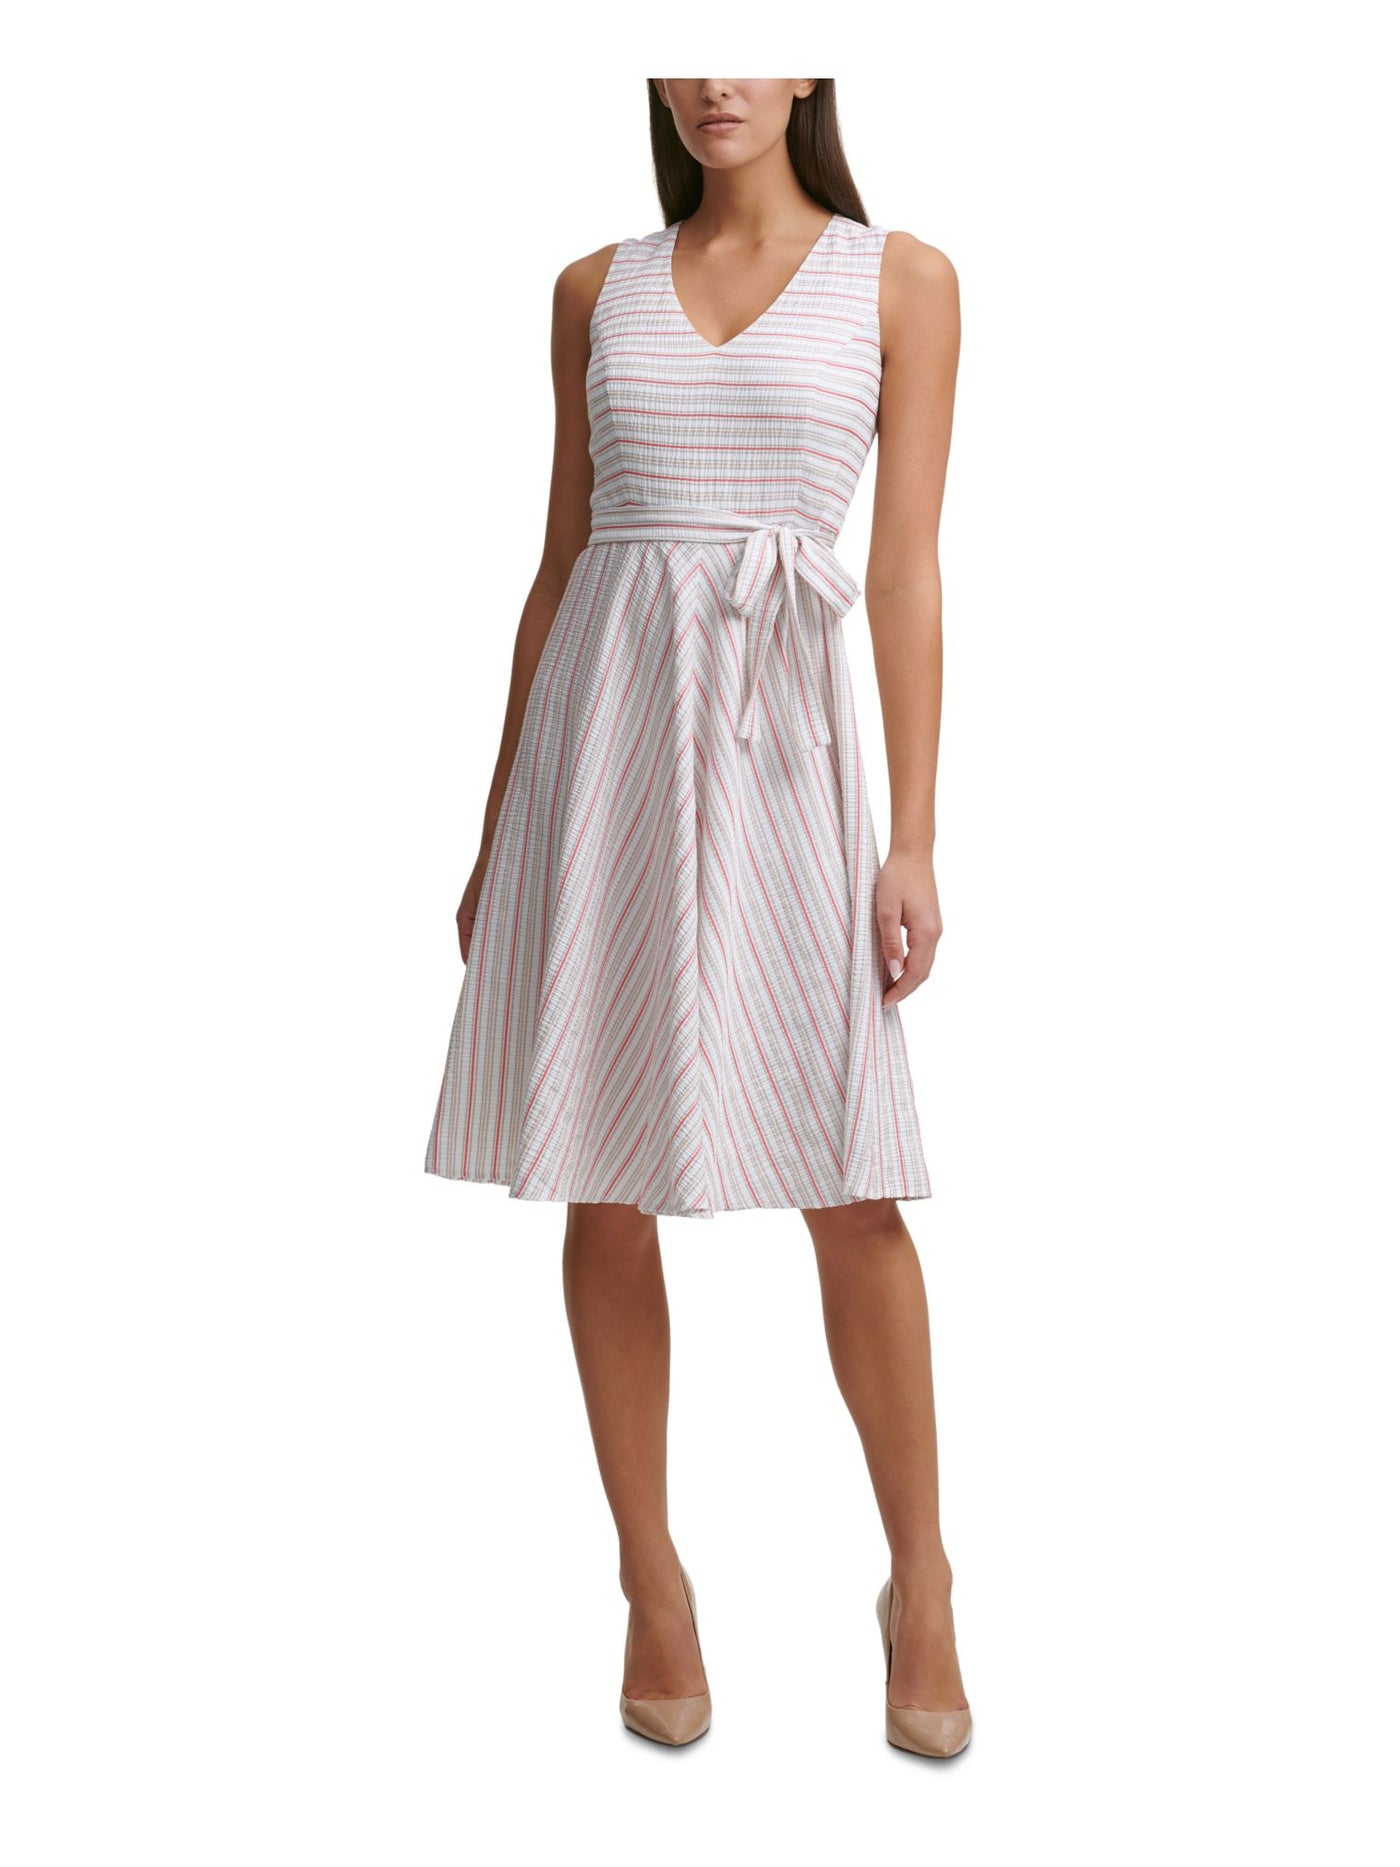 TOMMY HILFIGER Womens Ivory Zippered Tie Striped Sleeveless V Neck Knee Length Fit + Flare Dress 6